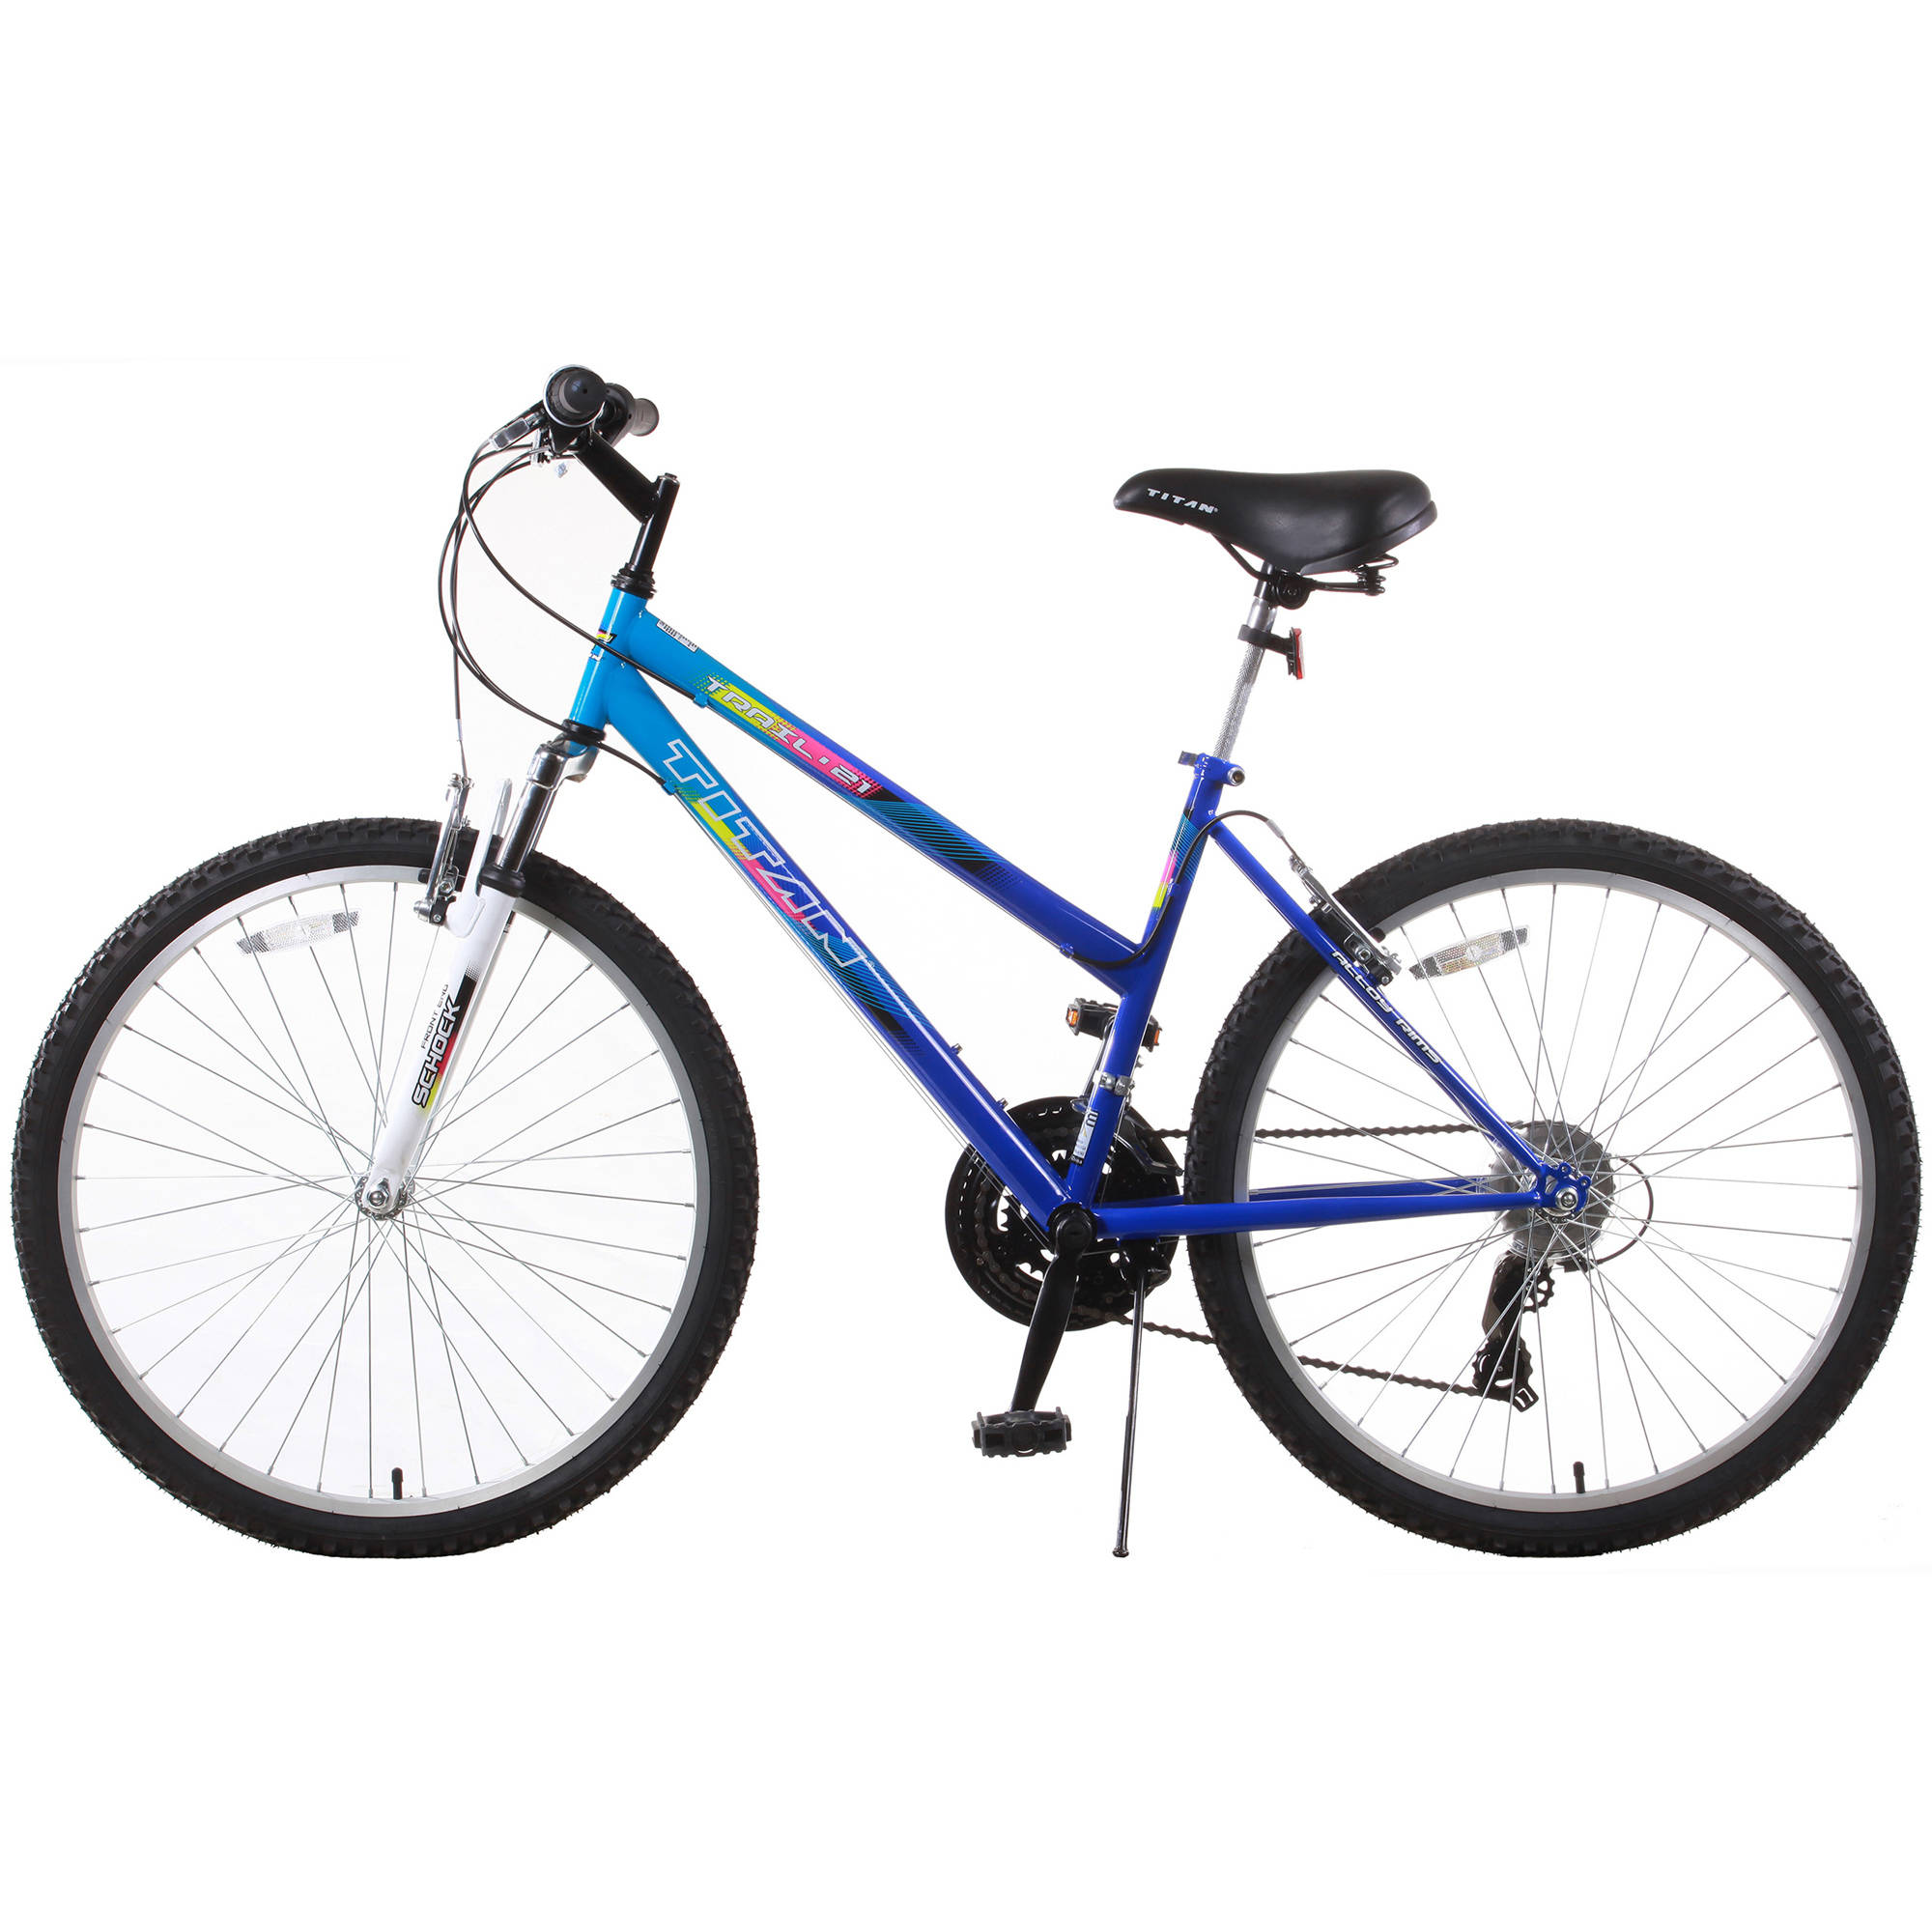 TITAN Trail 21-Speed Suspension Women's Mountain Bike with Front Shock, Blue - image 3 of 12